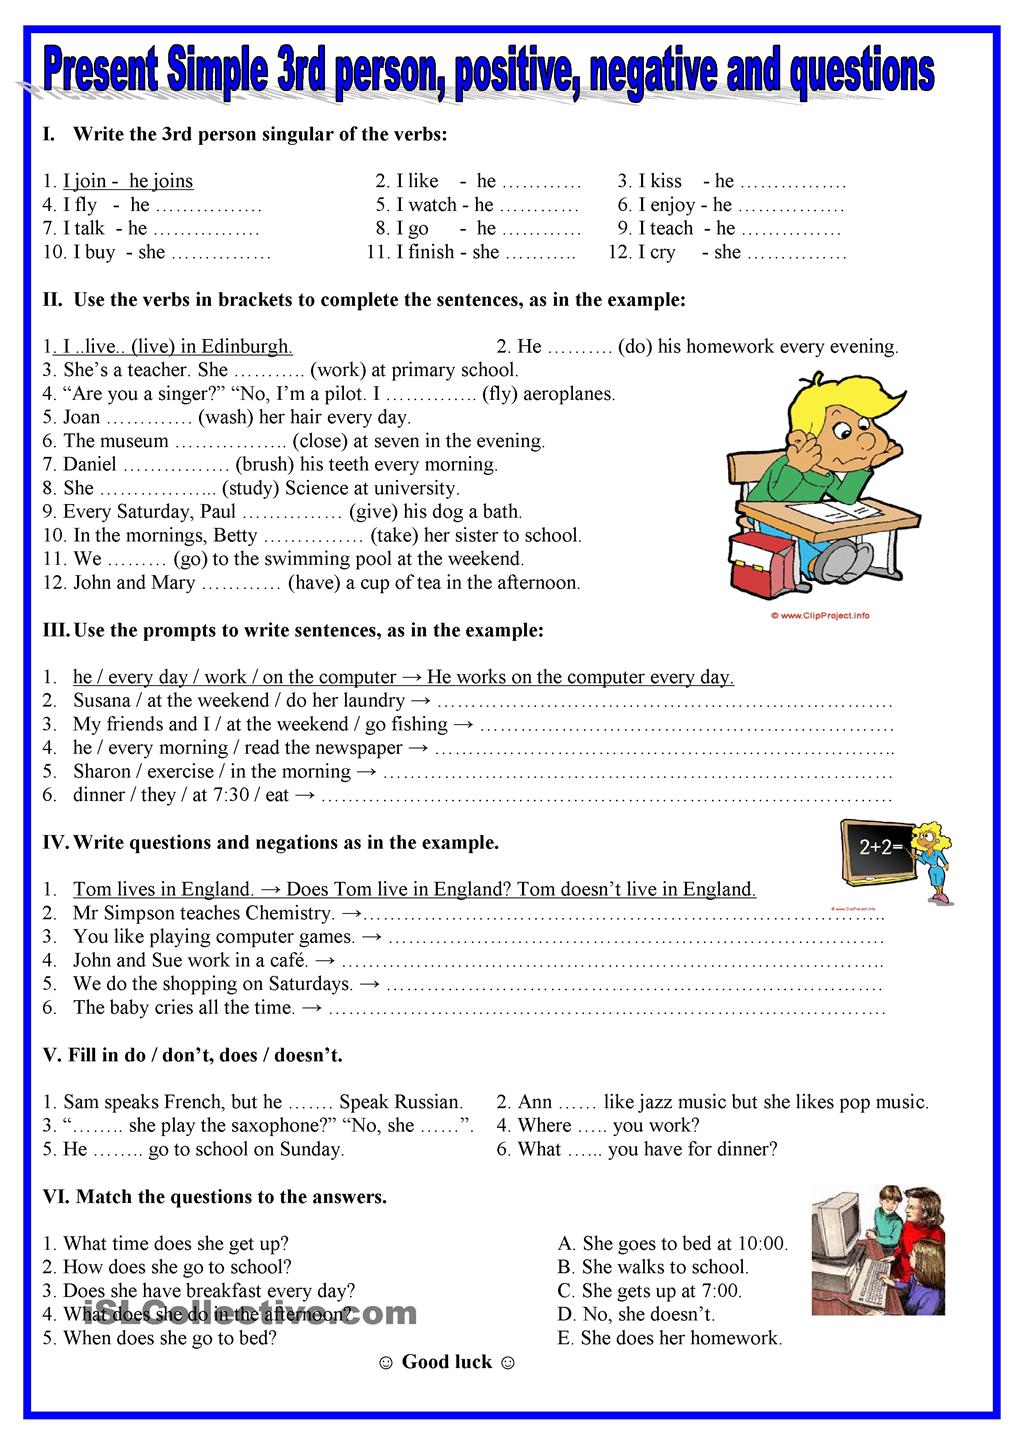 english-is-fun-with-alice-3-person-present-simple-activities